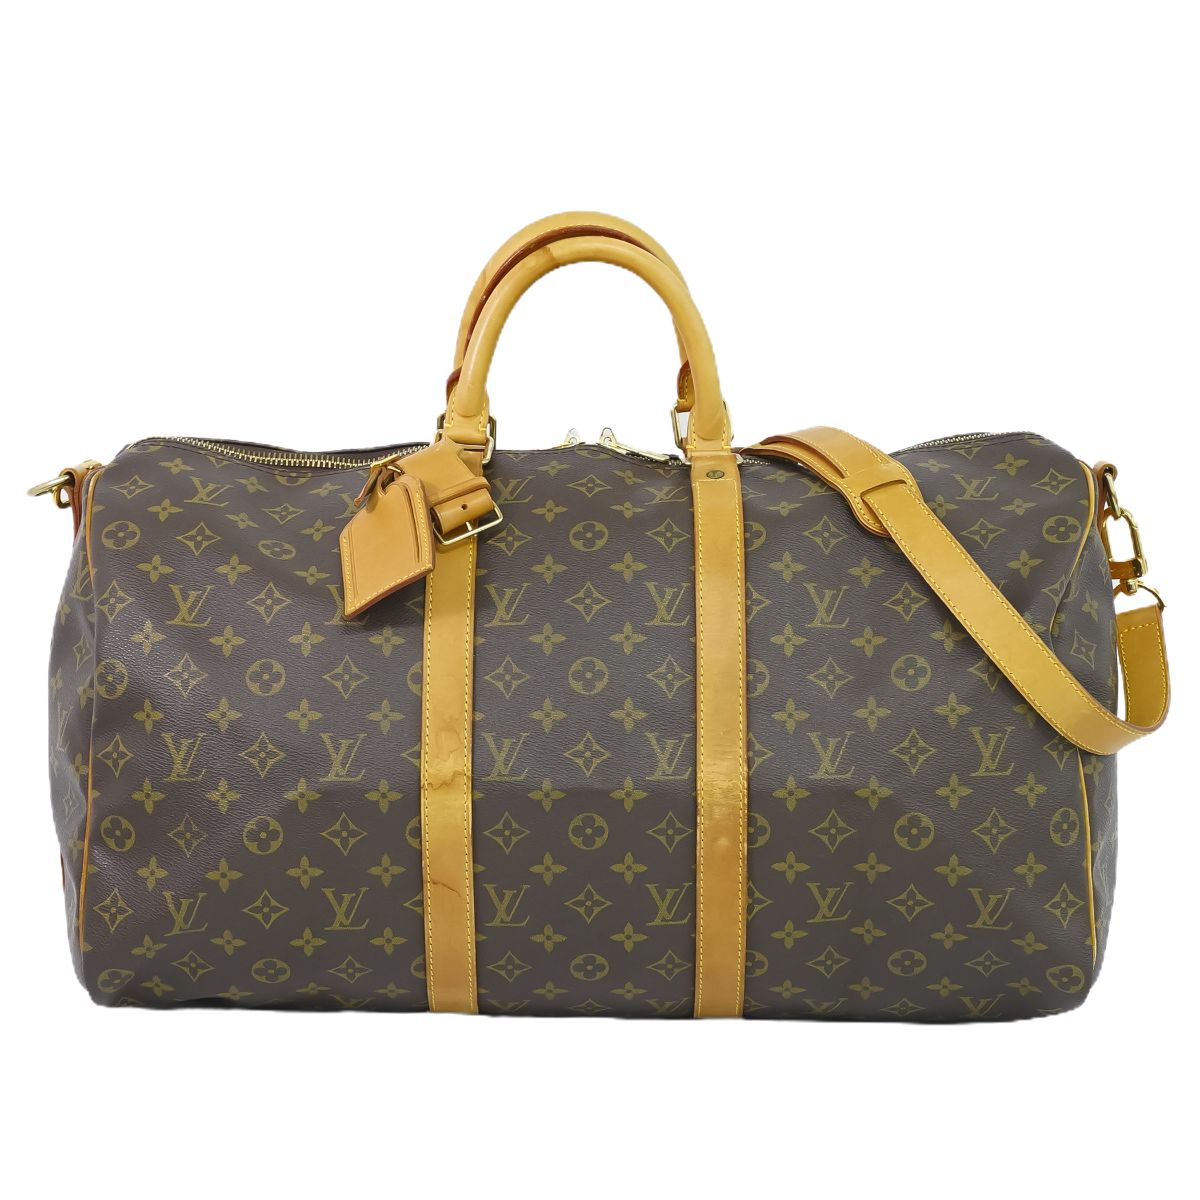 Auth Louis Vuitton Limited Keepall Bandouliere 50 monogram